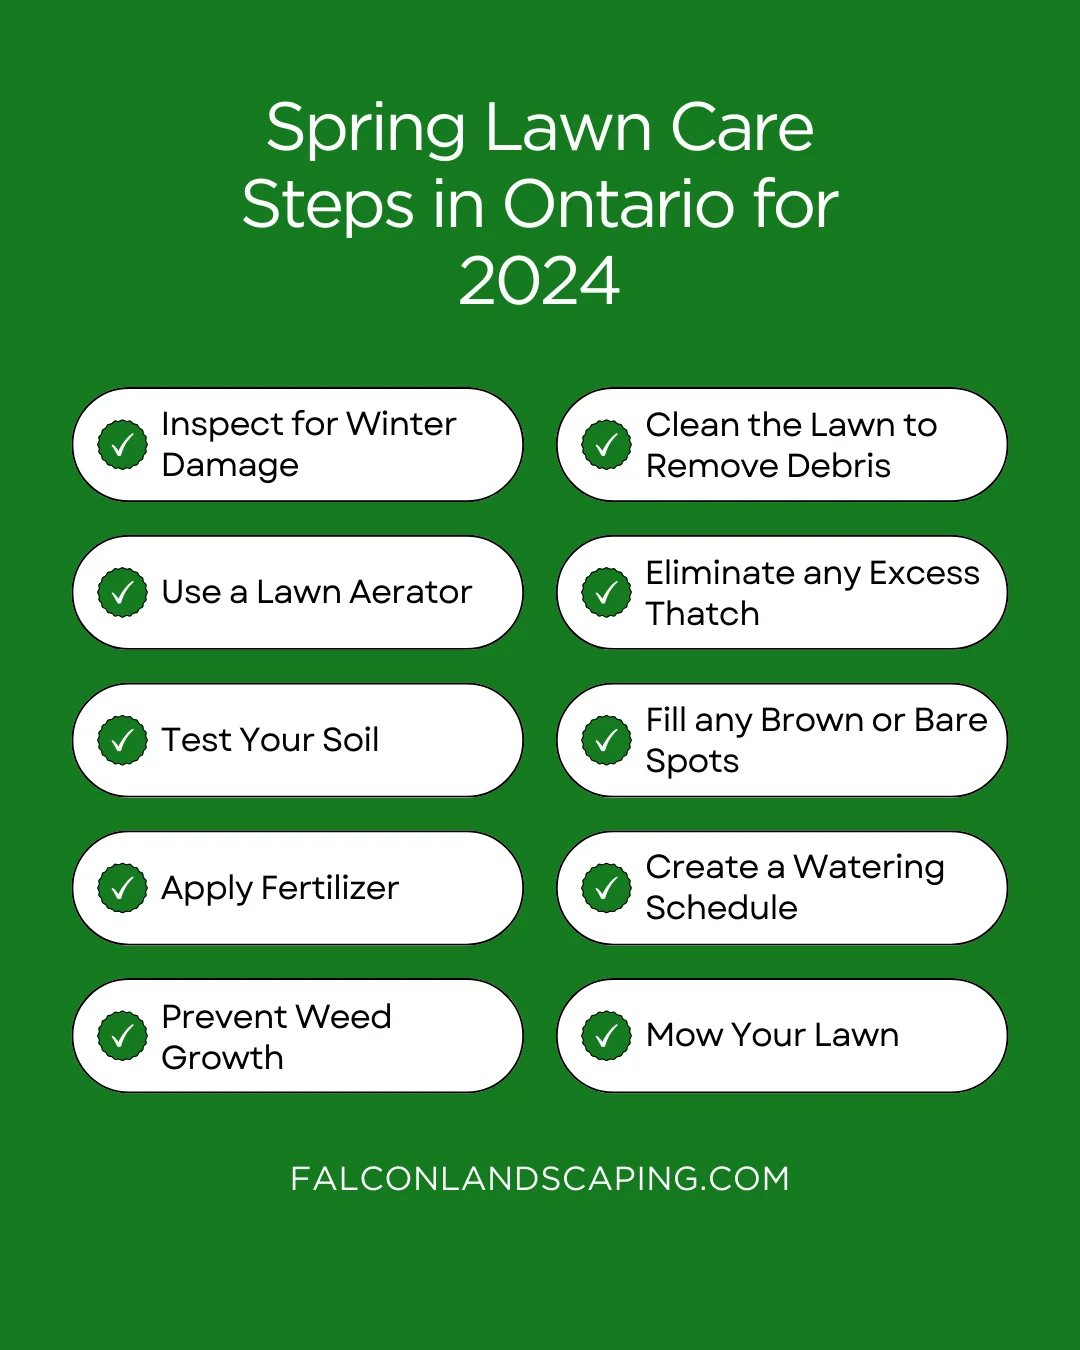 An infographic on the spring lawn care steps to follow